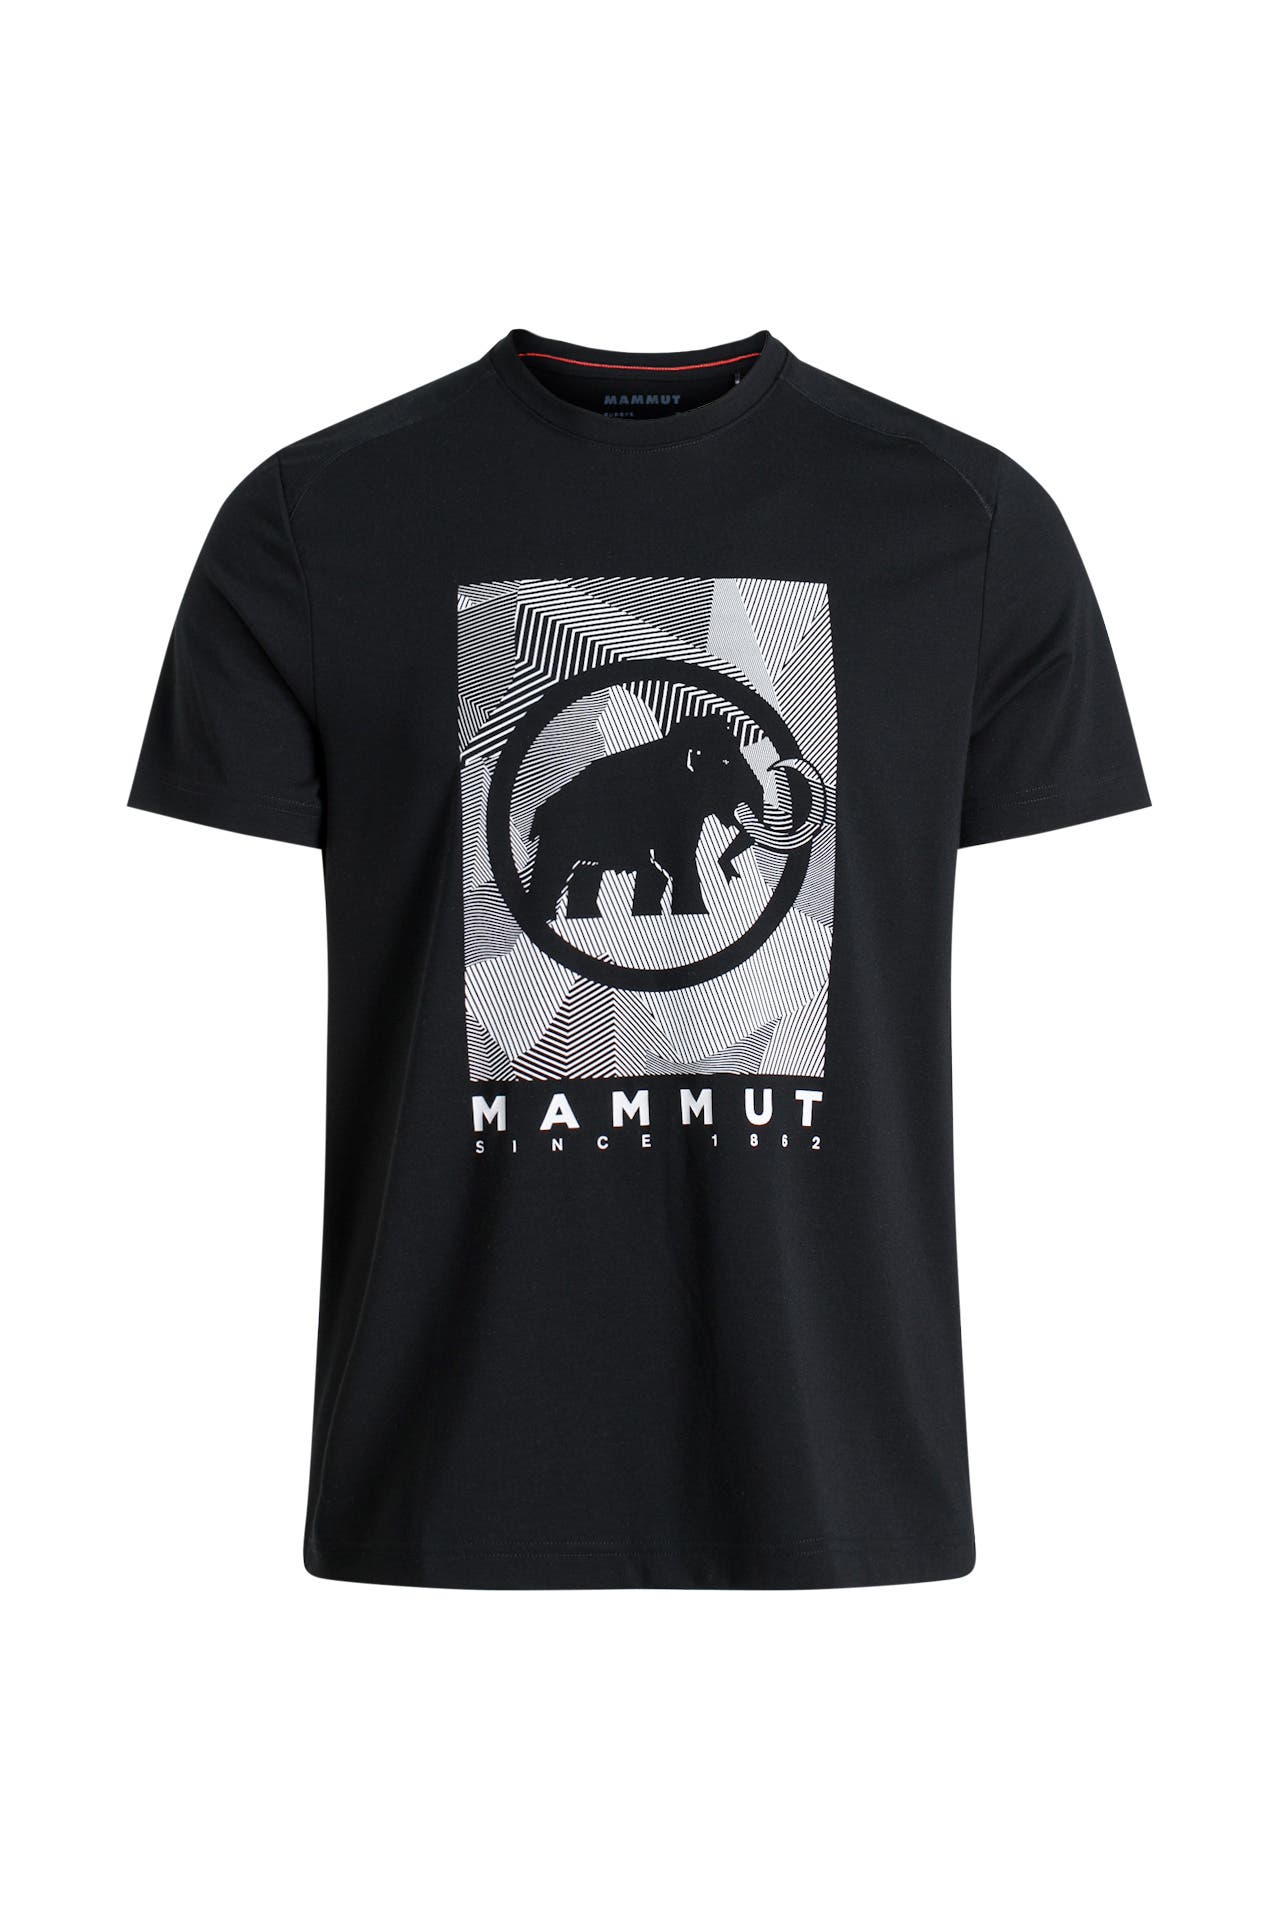 Mammut OUTLET in Germany • up to 70%* off in Sale | Outletcity Metzingen